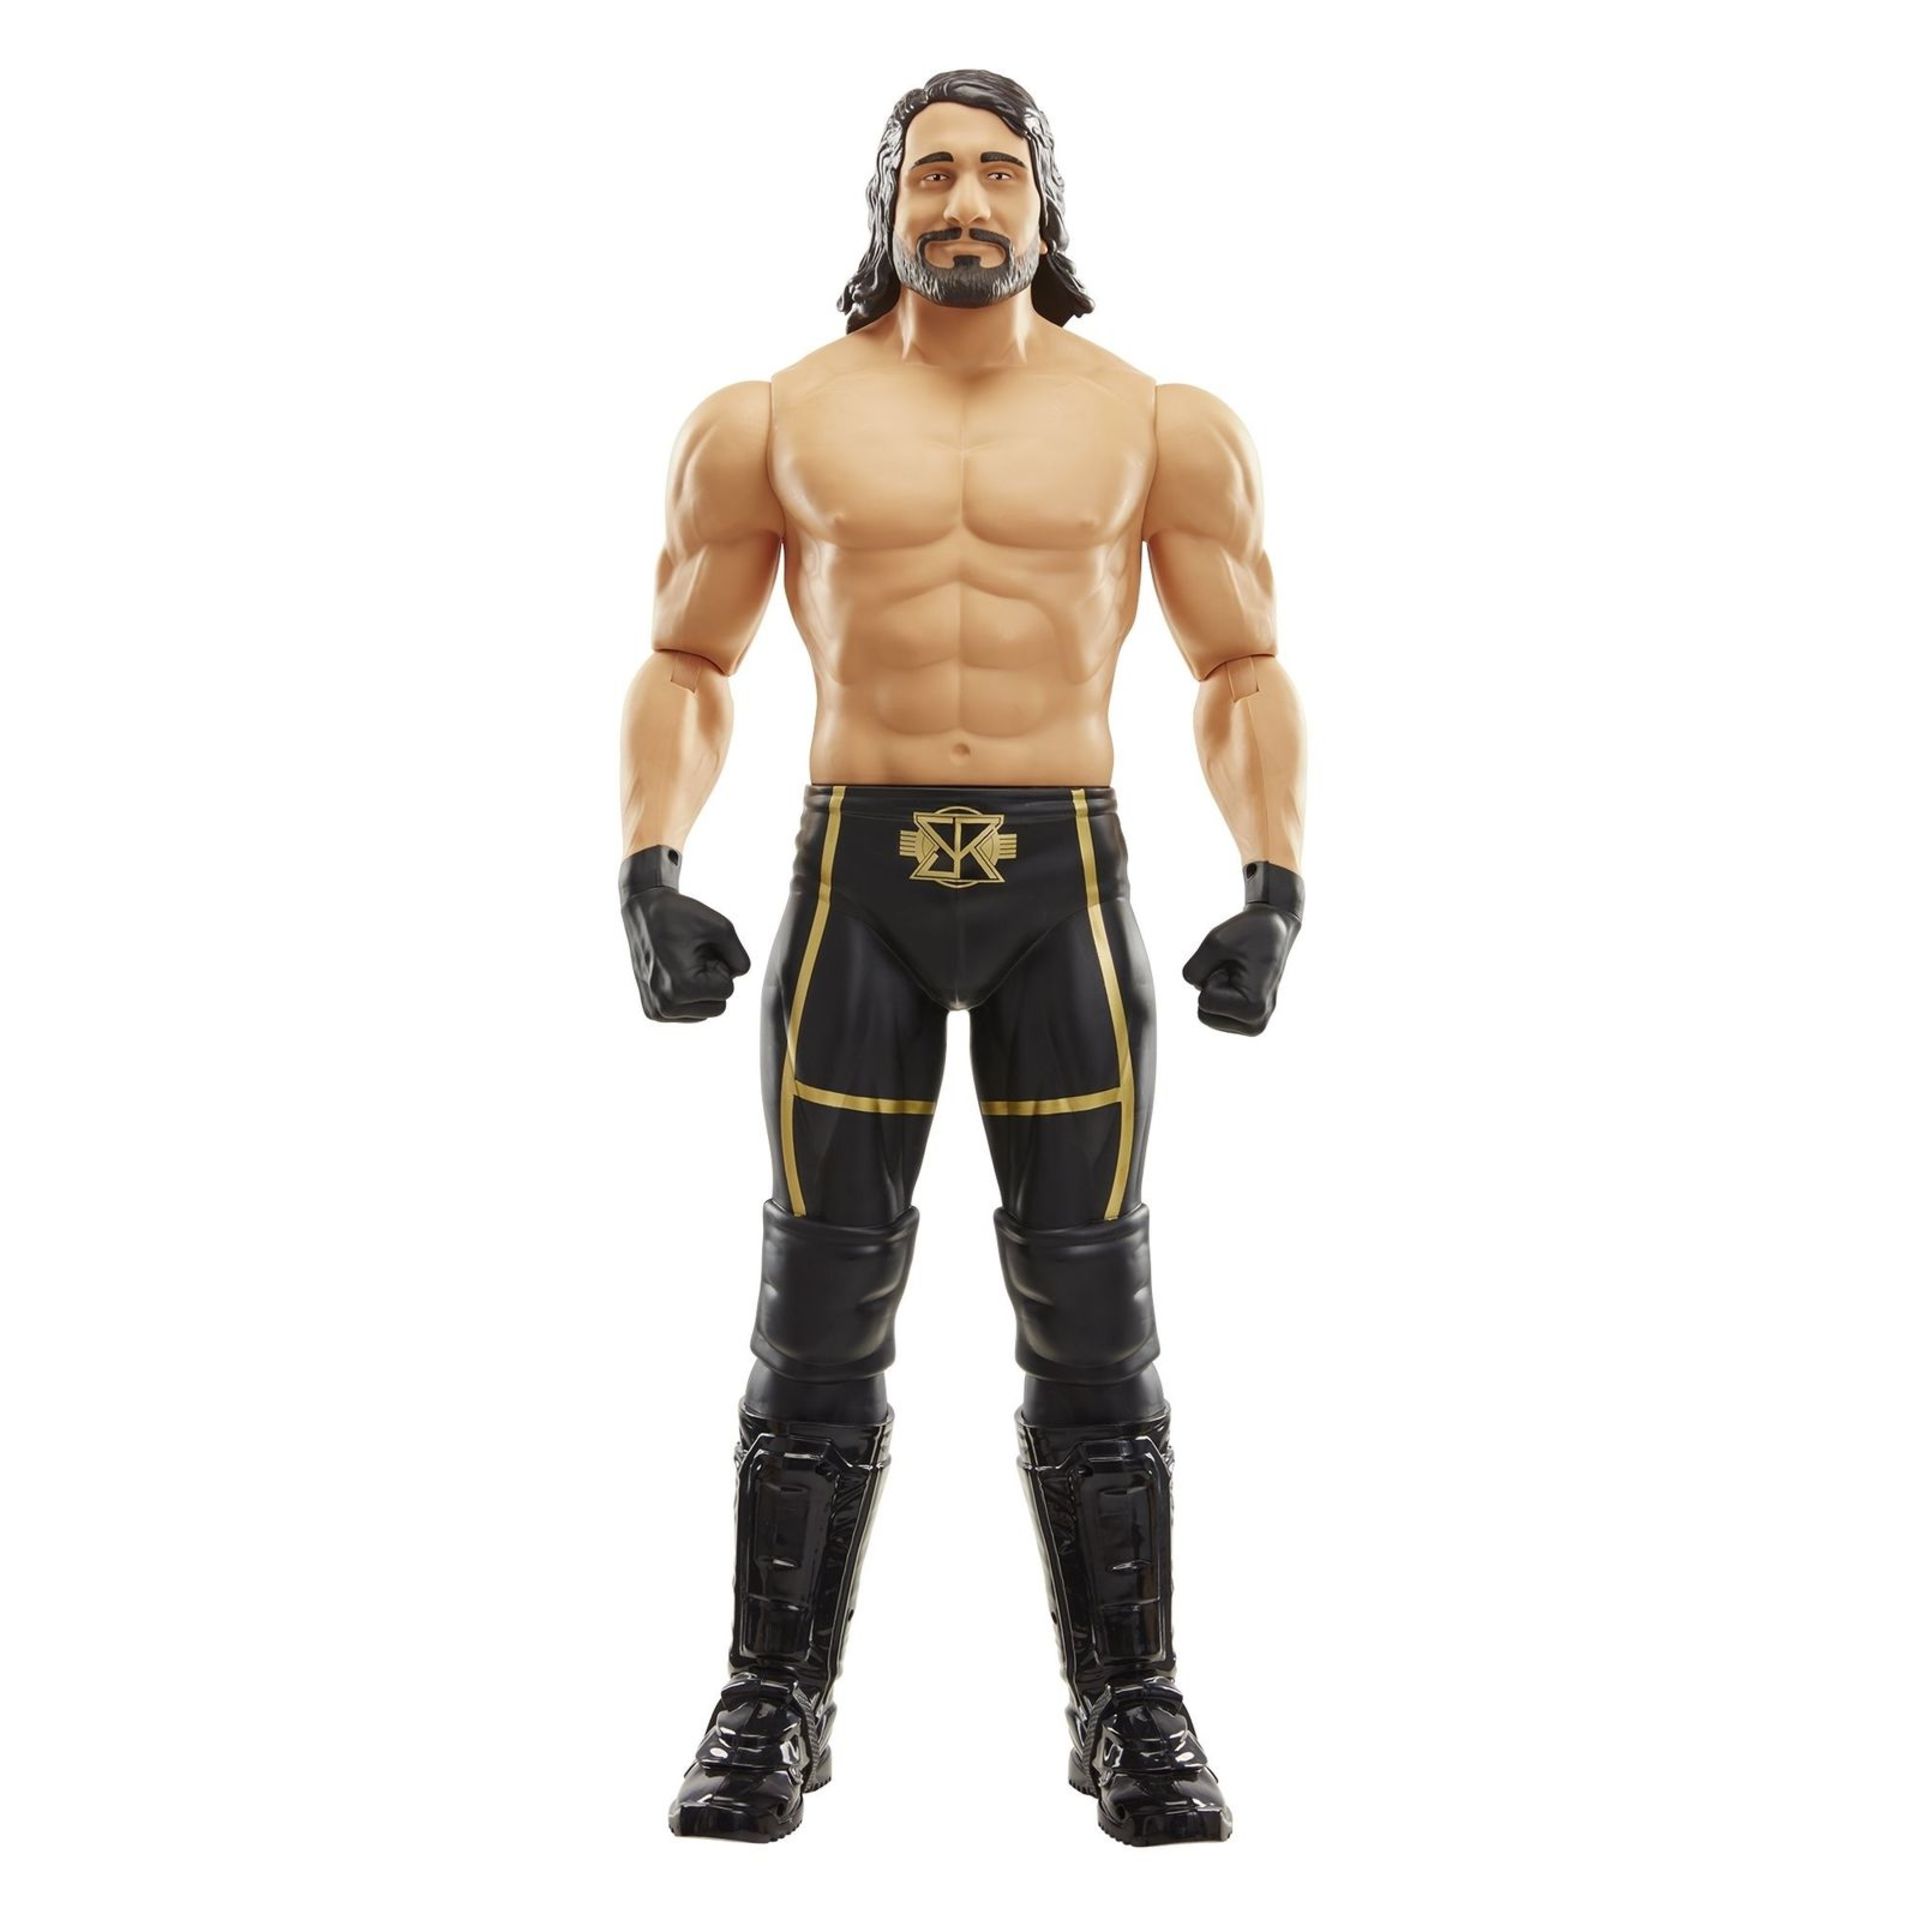 V Brand New Massive 31" WWE Seth Rollins Action Figure - TalsonMarket Price £29.00 - 8 Points of - Image 2 of 5